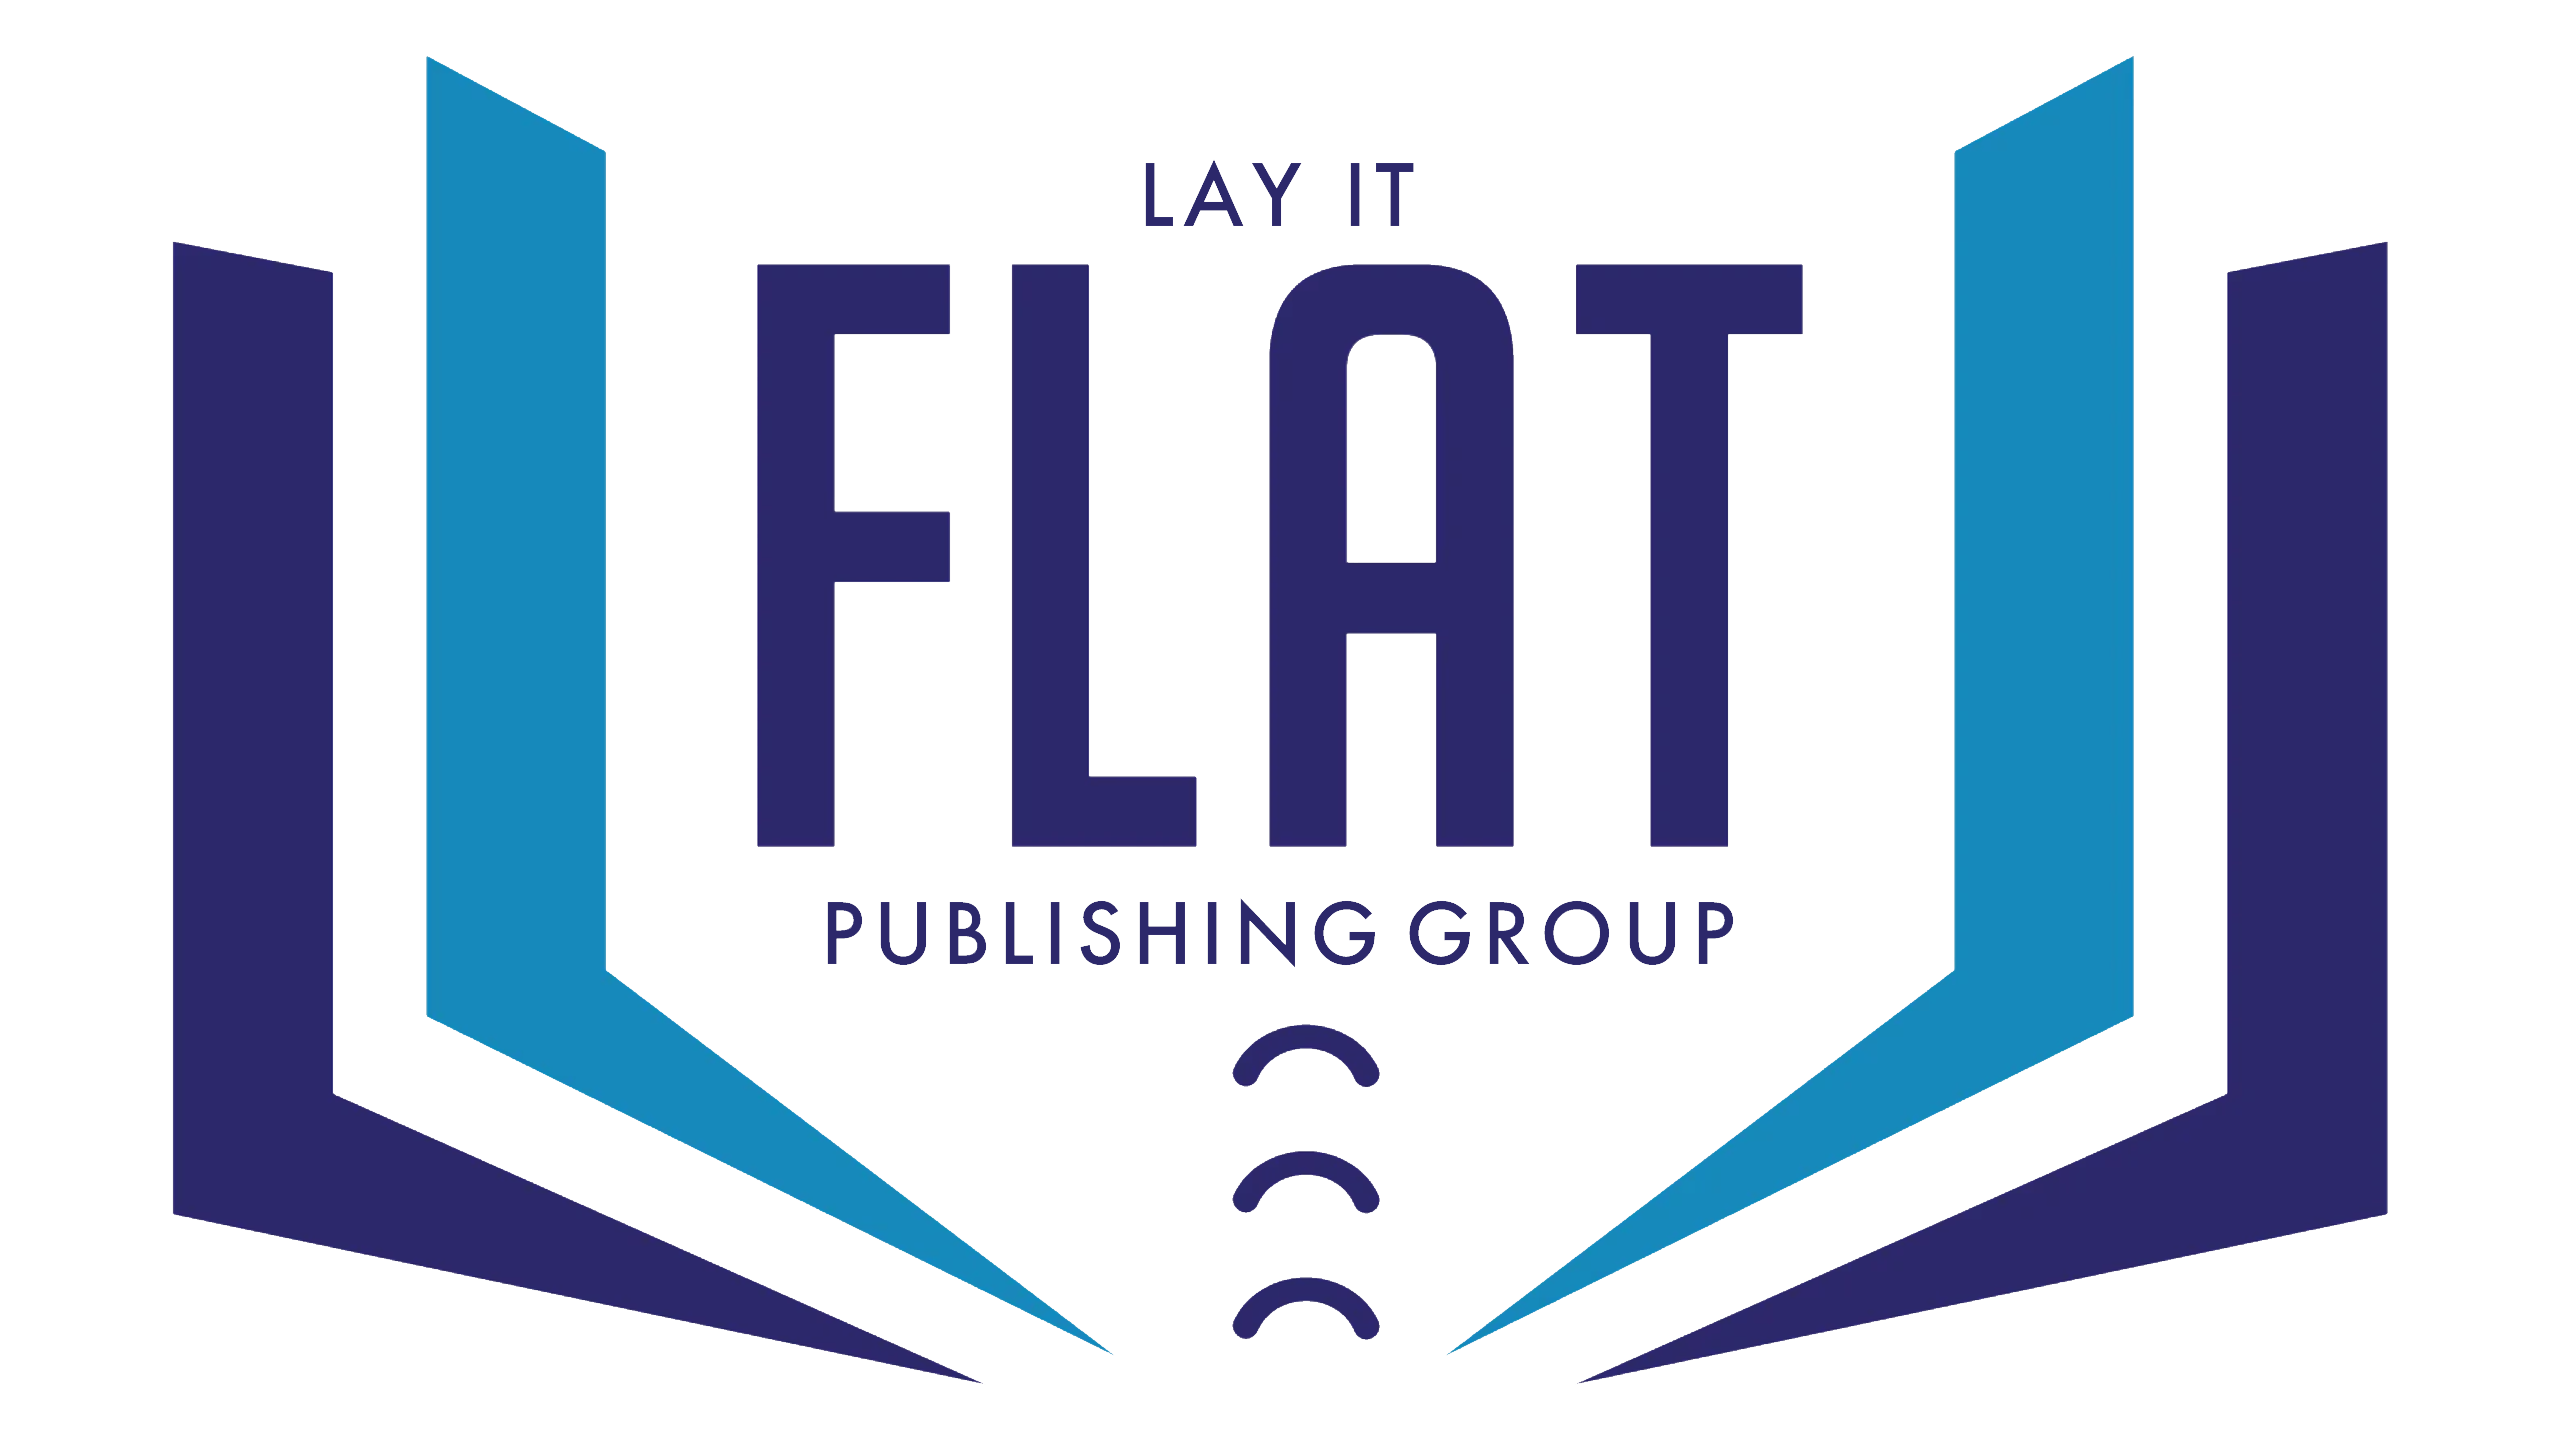 Coloring Books – Lay it Flat Publishing Group